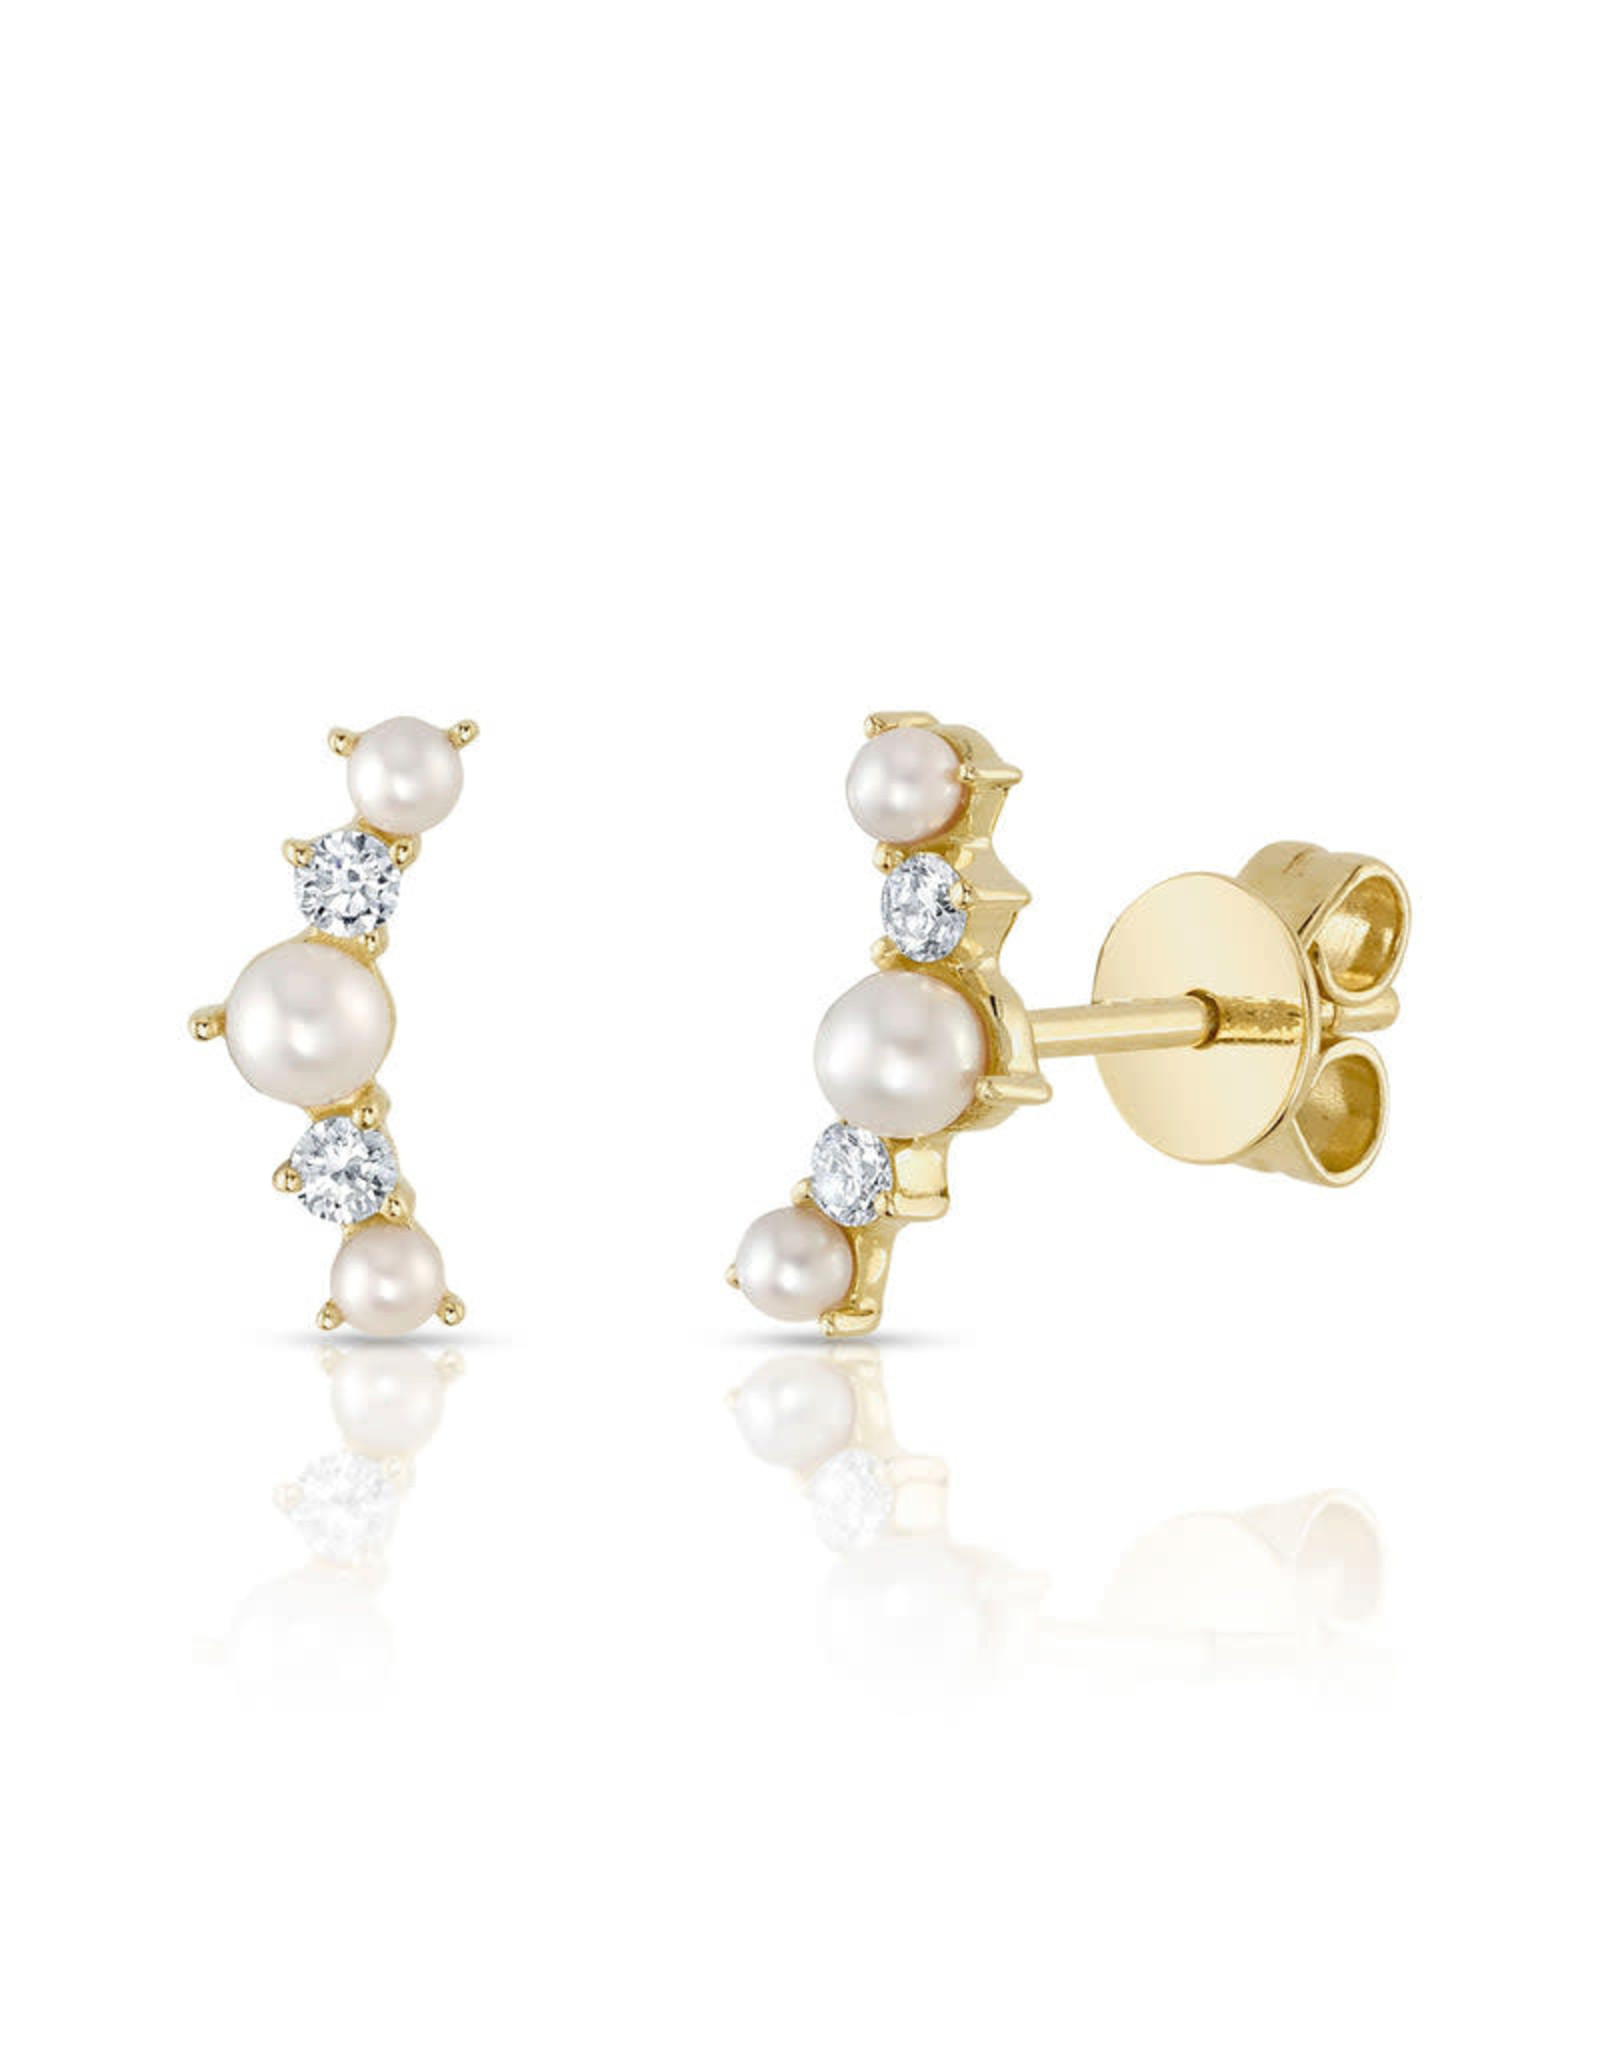 14K Yellow Gold Pearl and Diamond Stud Earring Climbers, D: 0.09ct